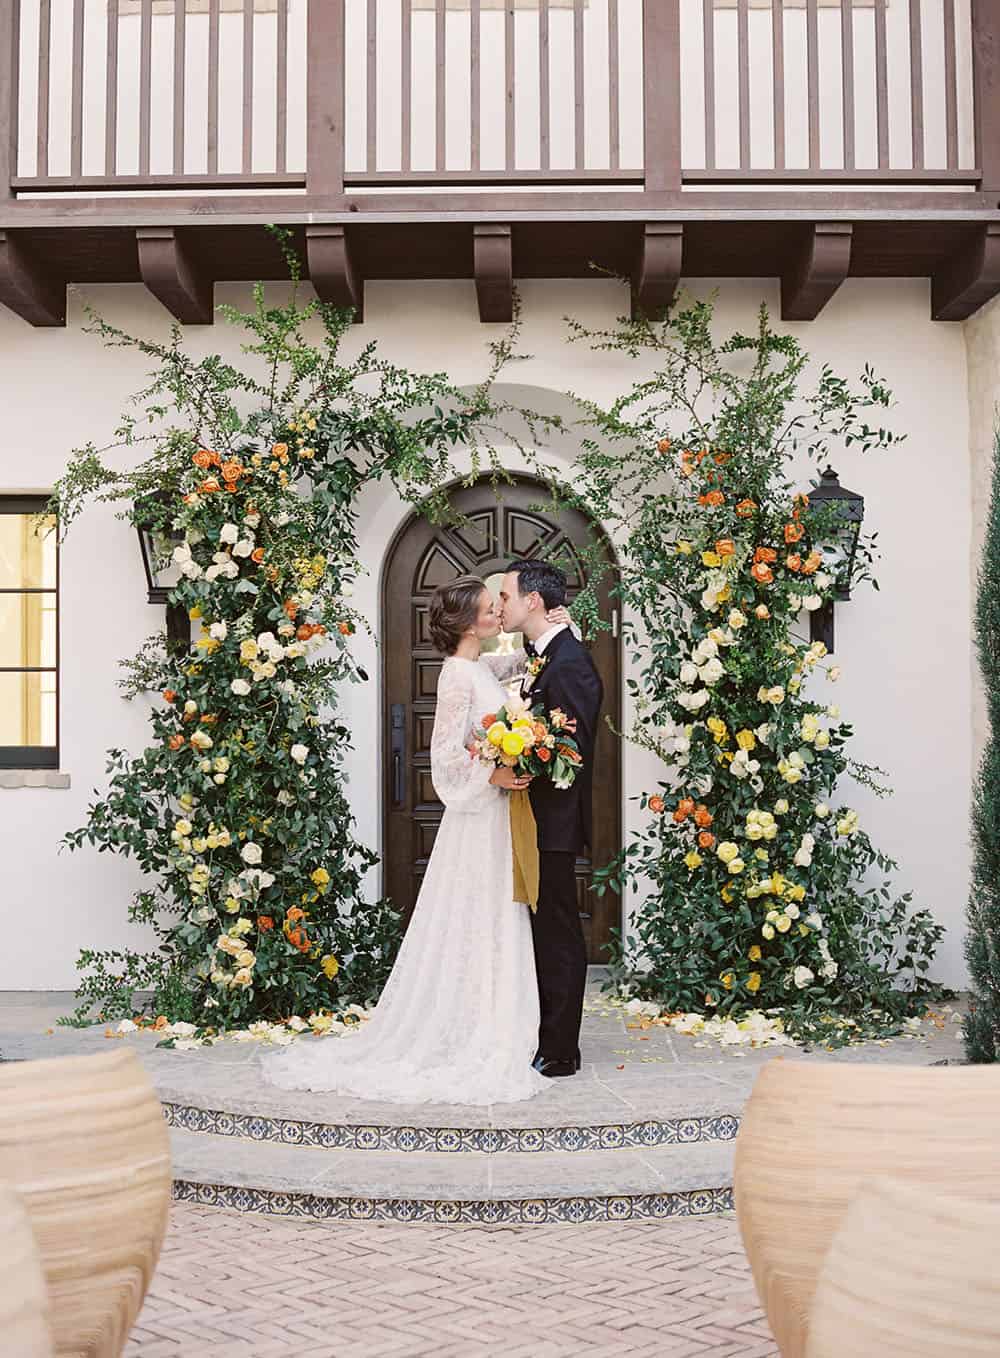 Spanish Mission Style Wedding With Modern Abstract Decor ⋆ Ruffled